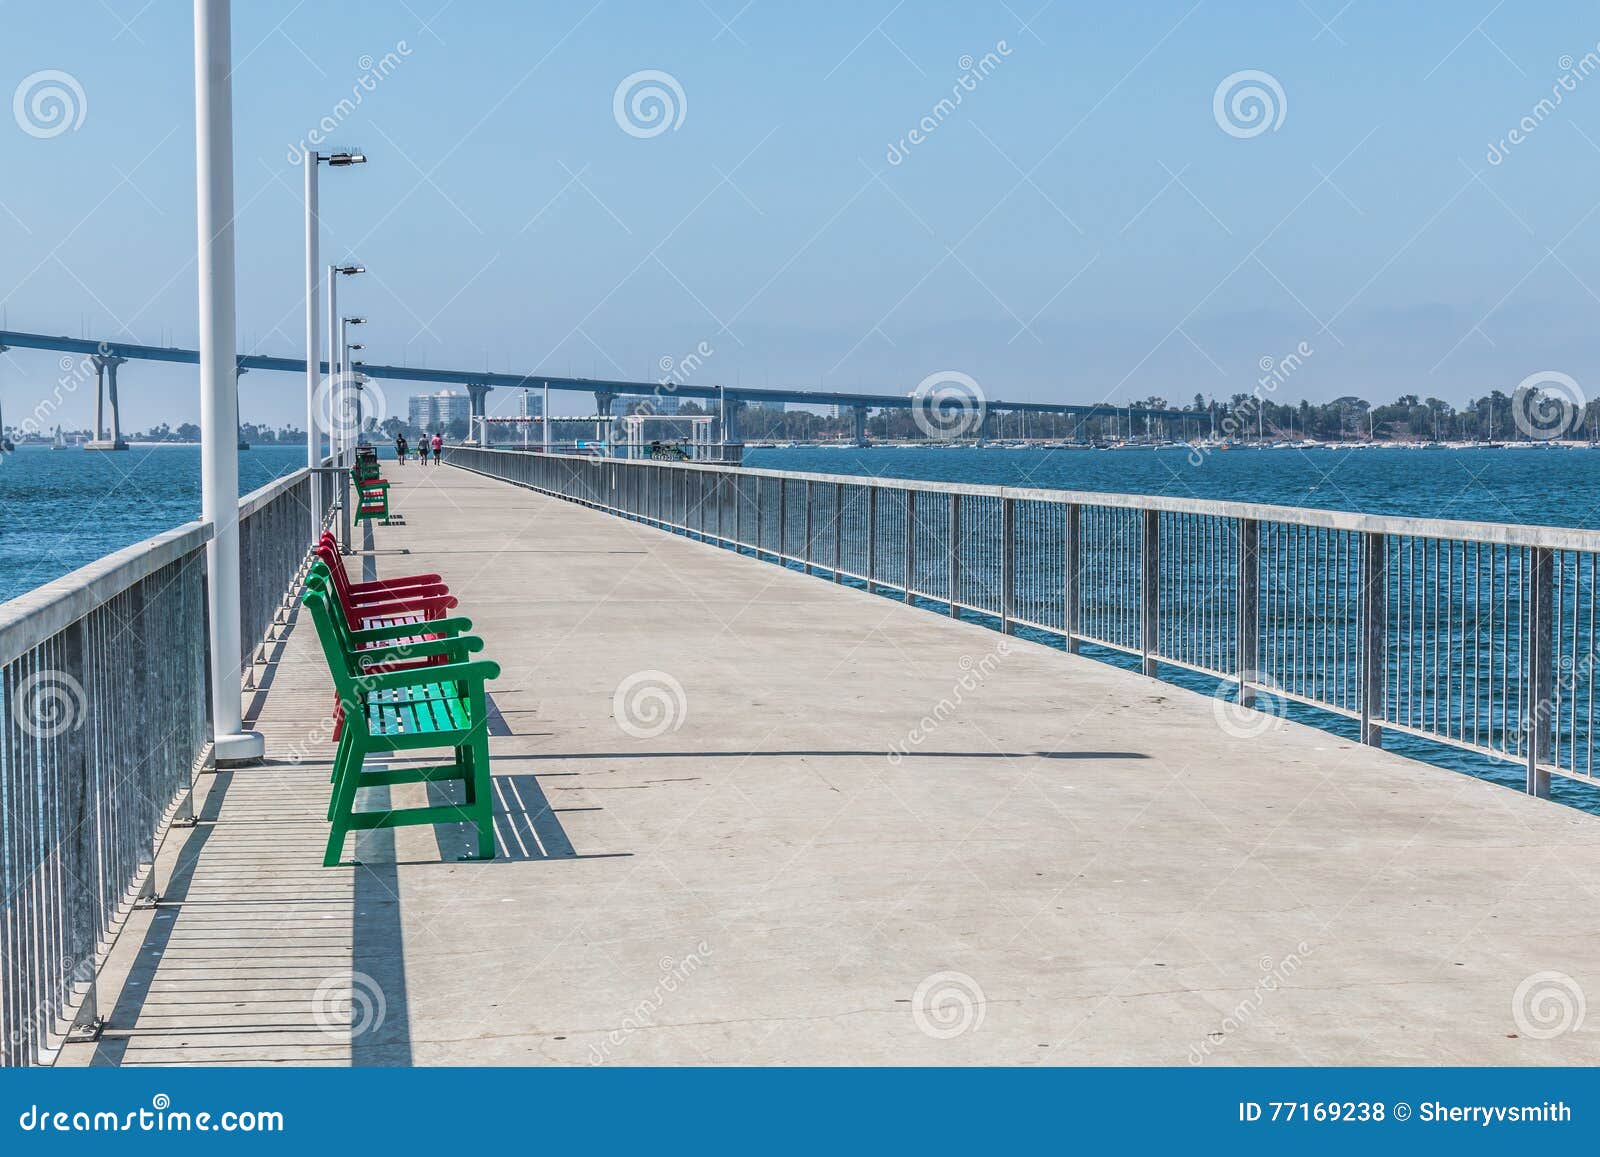 pier with benches at cesar chavez park in san diego